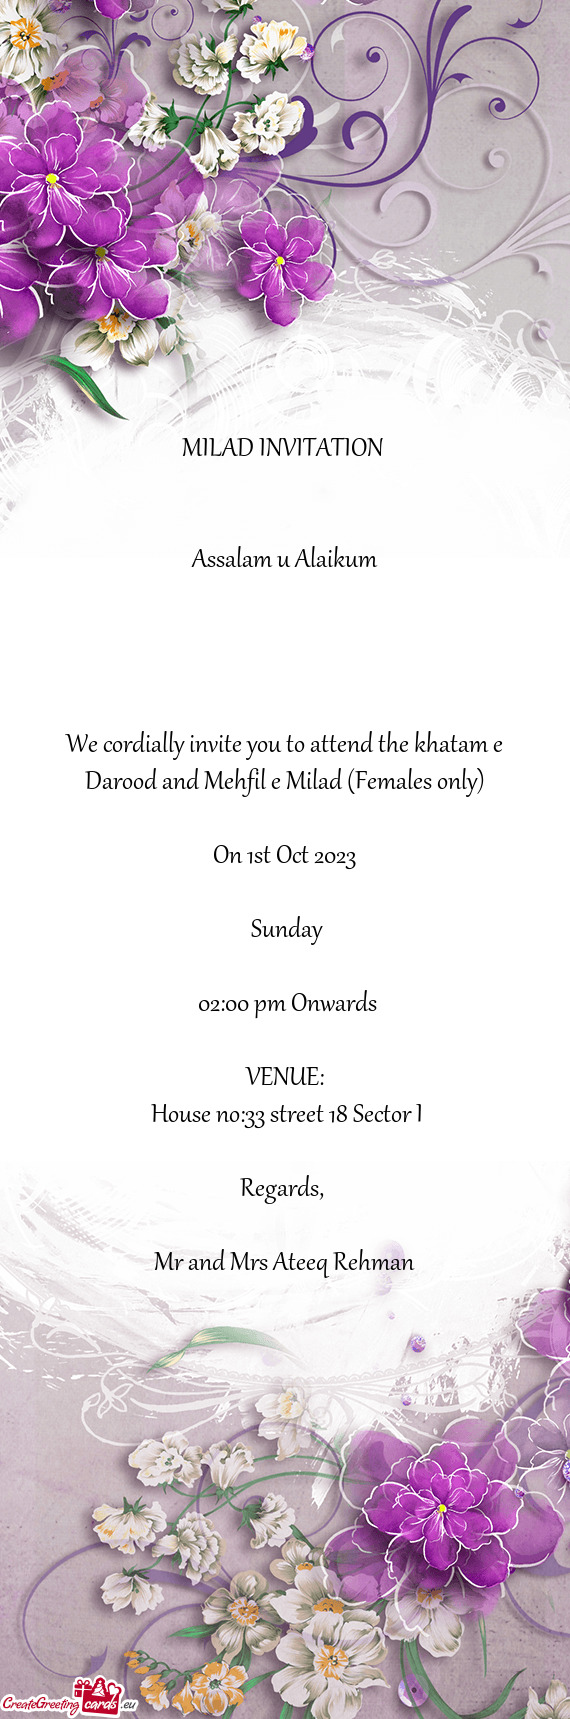 We cordially invite you to attend the khatam e Darood and Mehfil e Milad (Females only)